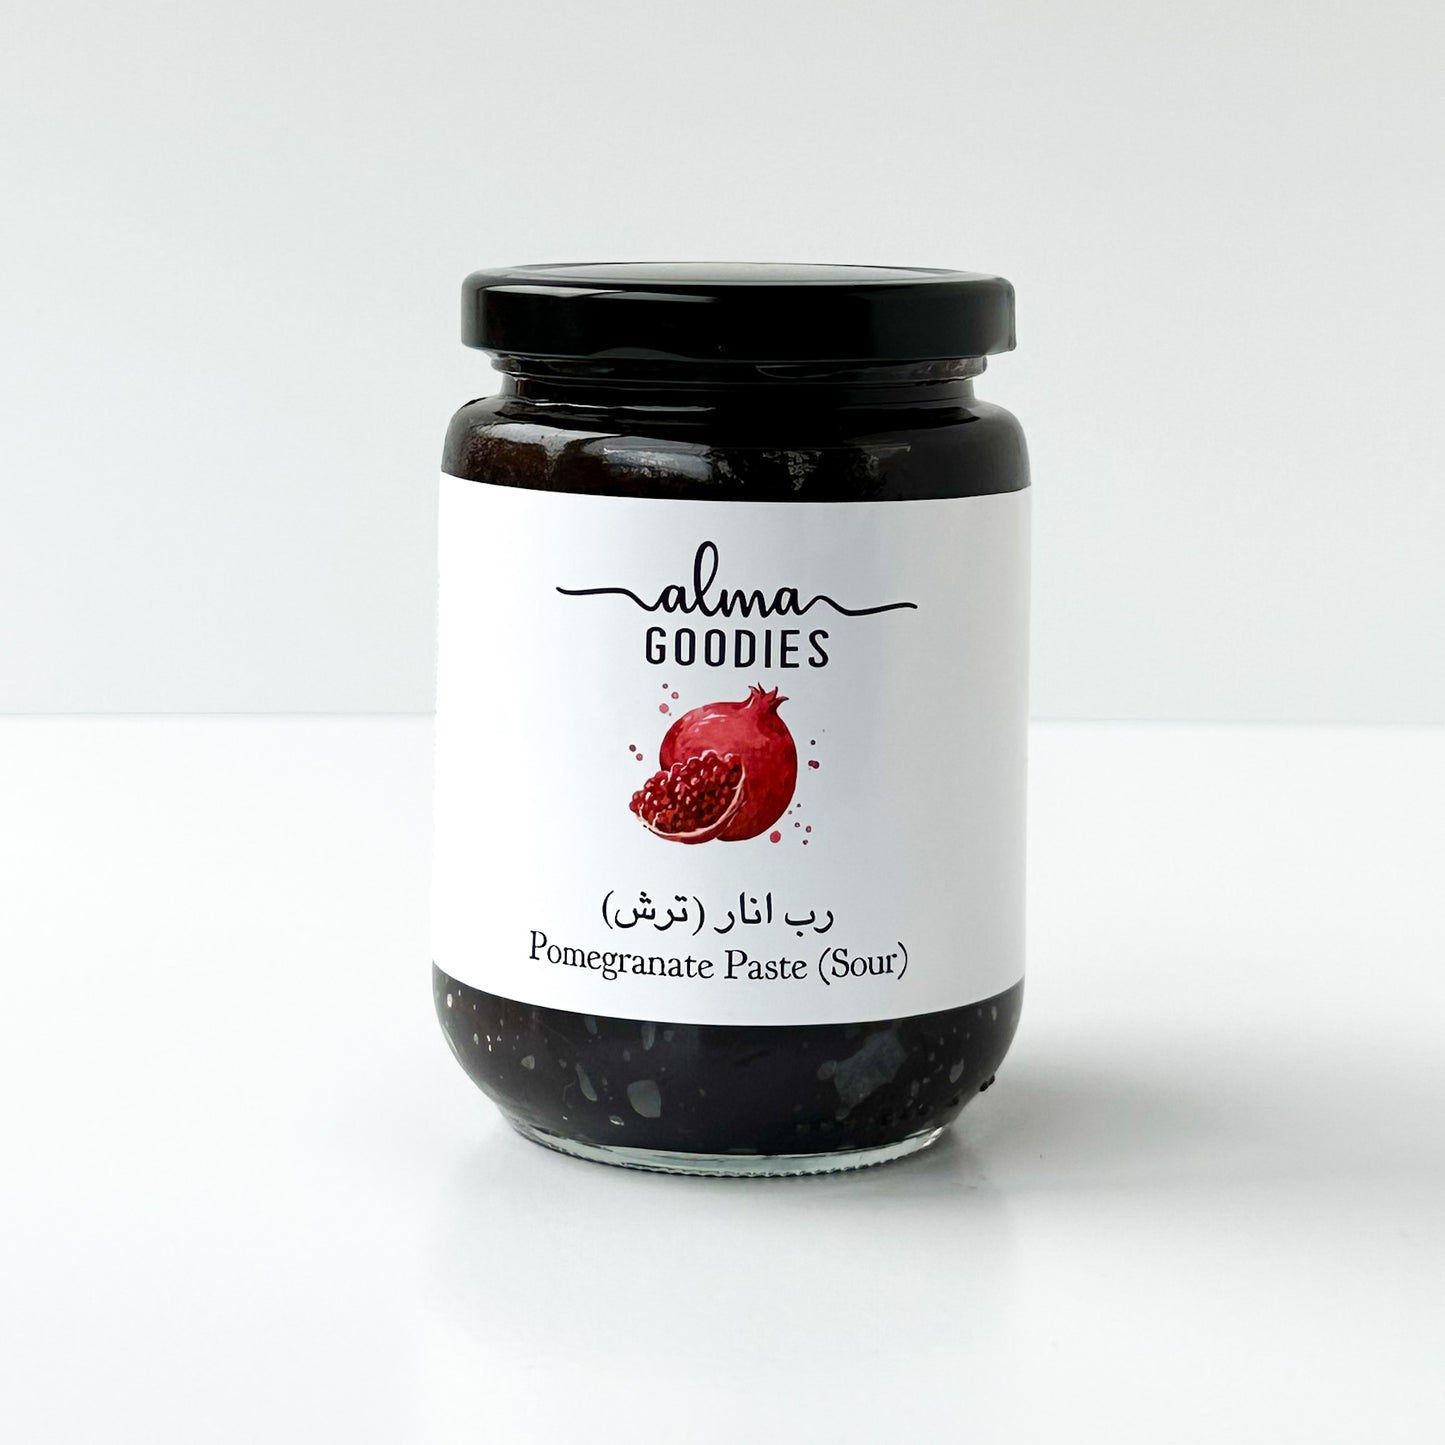 Sour Pomegranate Paste - A Tart and Flavorful Culinary Delight (450 grams)